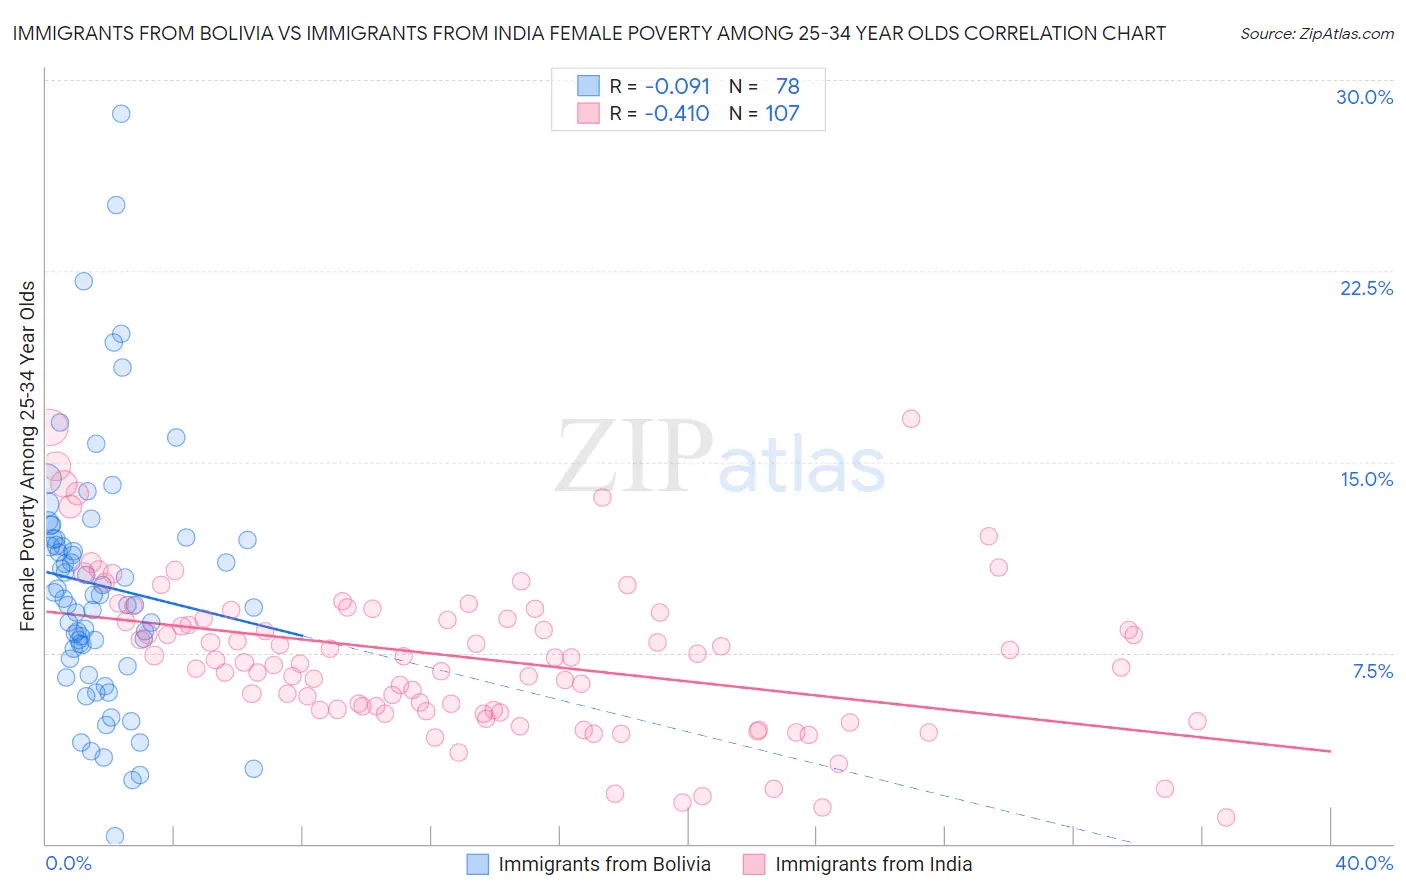 Immigrants from Bolivia vs Immigrants from India Female Poverty Among 25-34 Year Olds